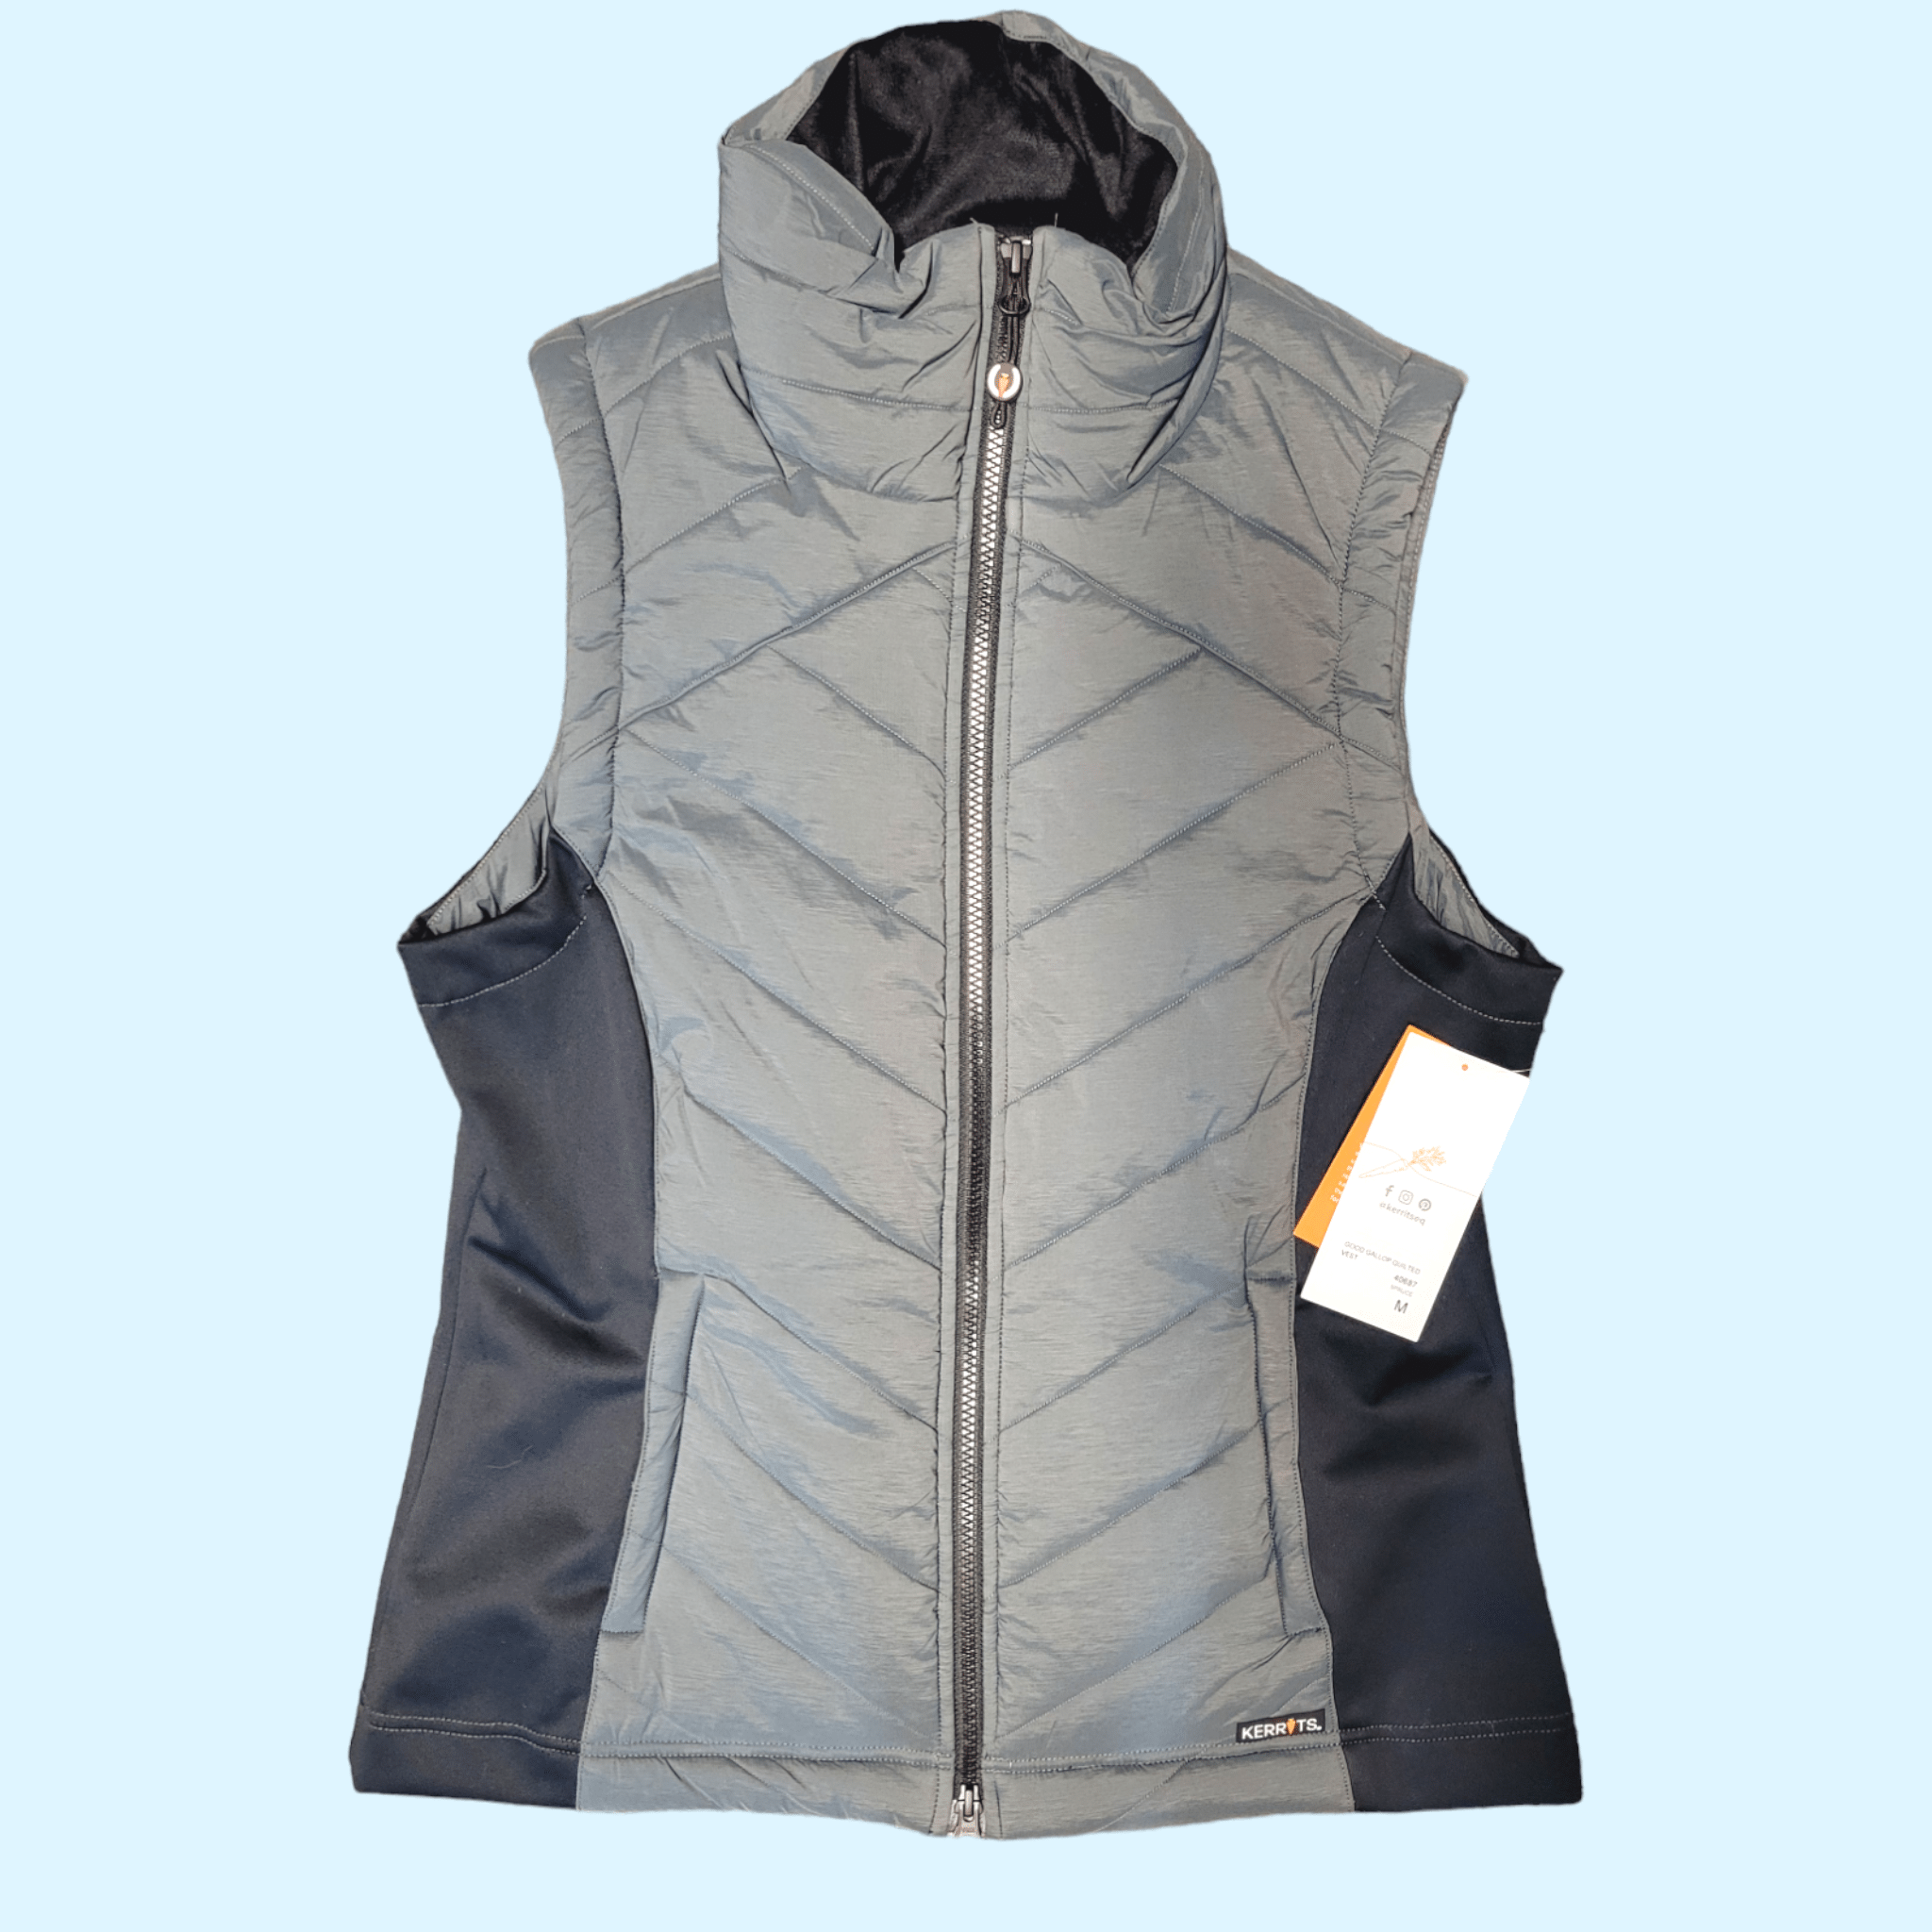 Kerrits Good Gallop Quilted Vest in Spruce - Medium NWT